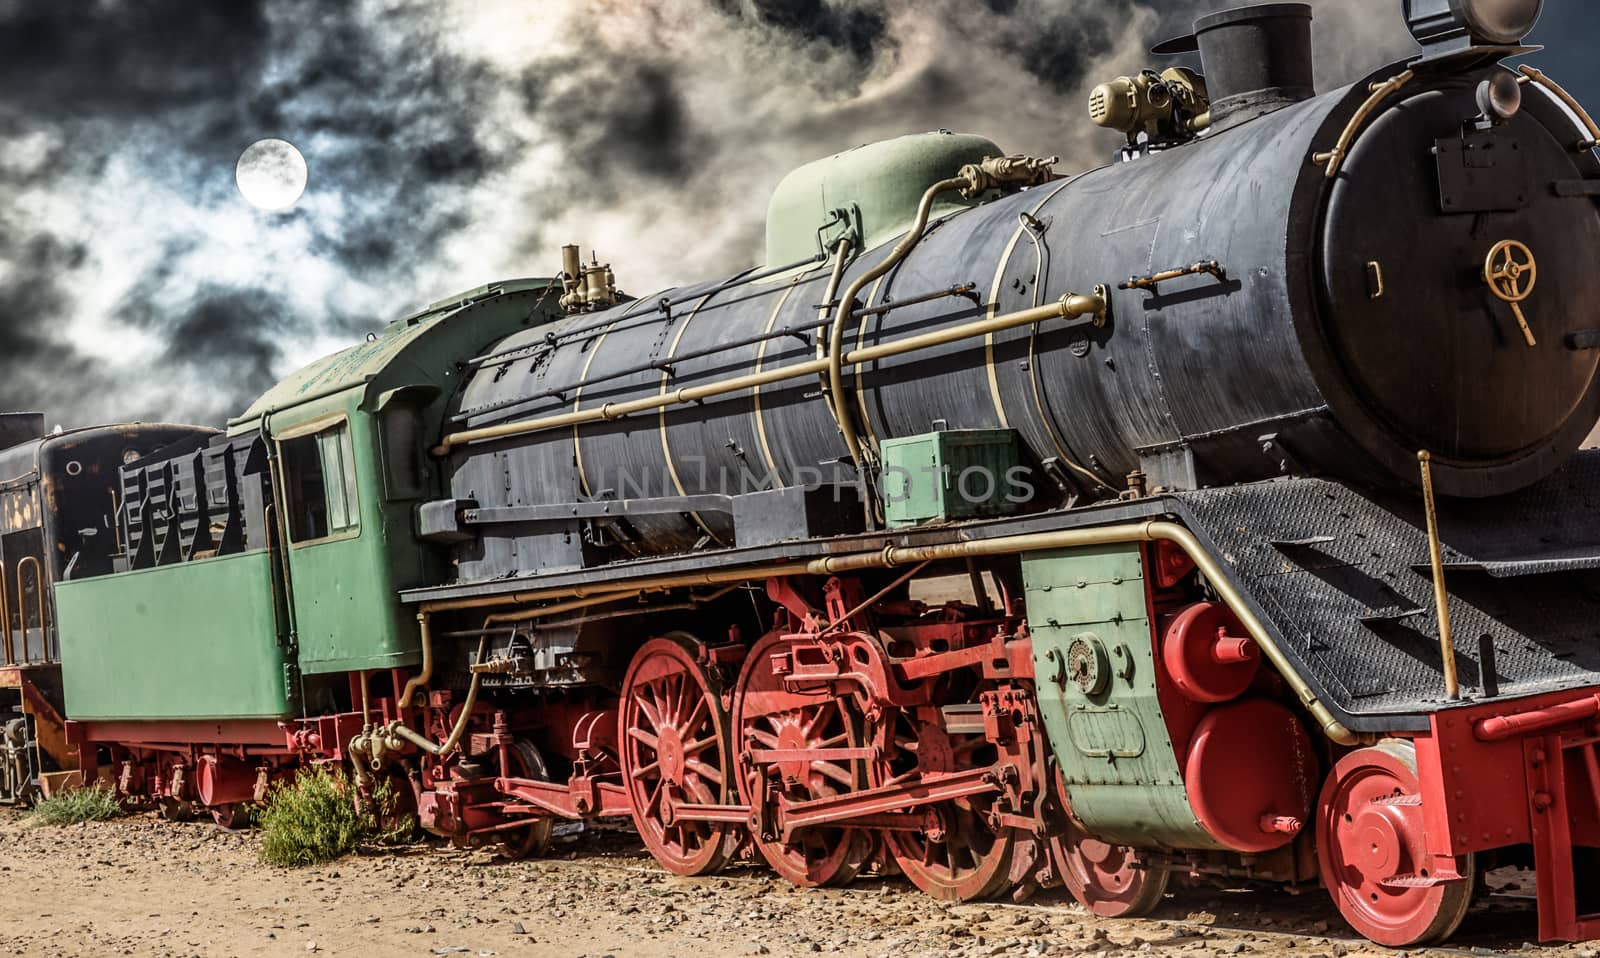 Alienated photograph of the steam locomotive of Wadi Rum in Jordan with a dramatic background, middle east